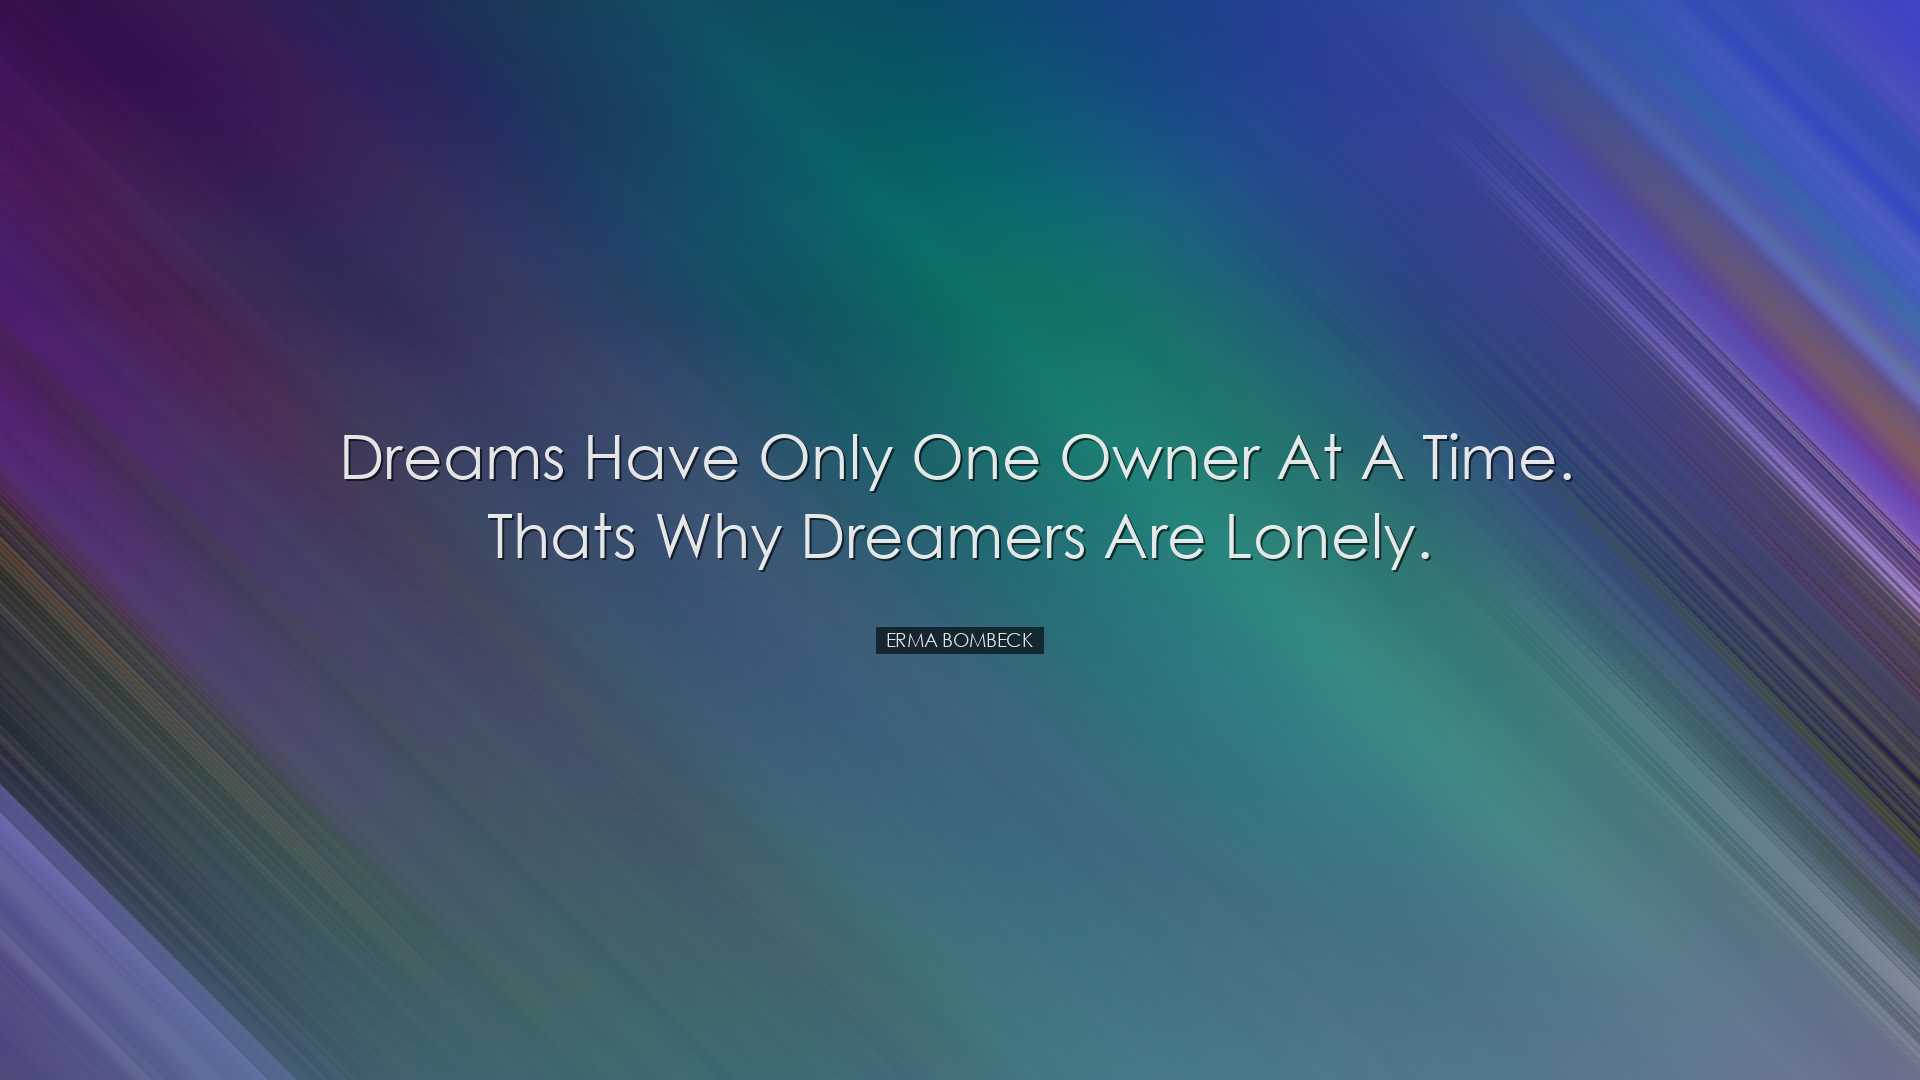 Dreams have only one owner at a time. Thats why dreamers are lonel